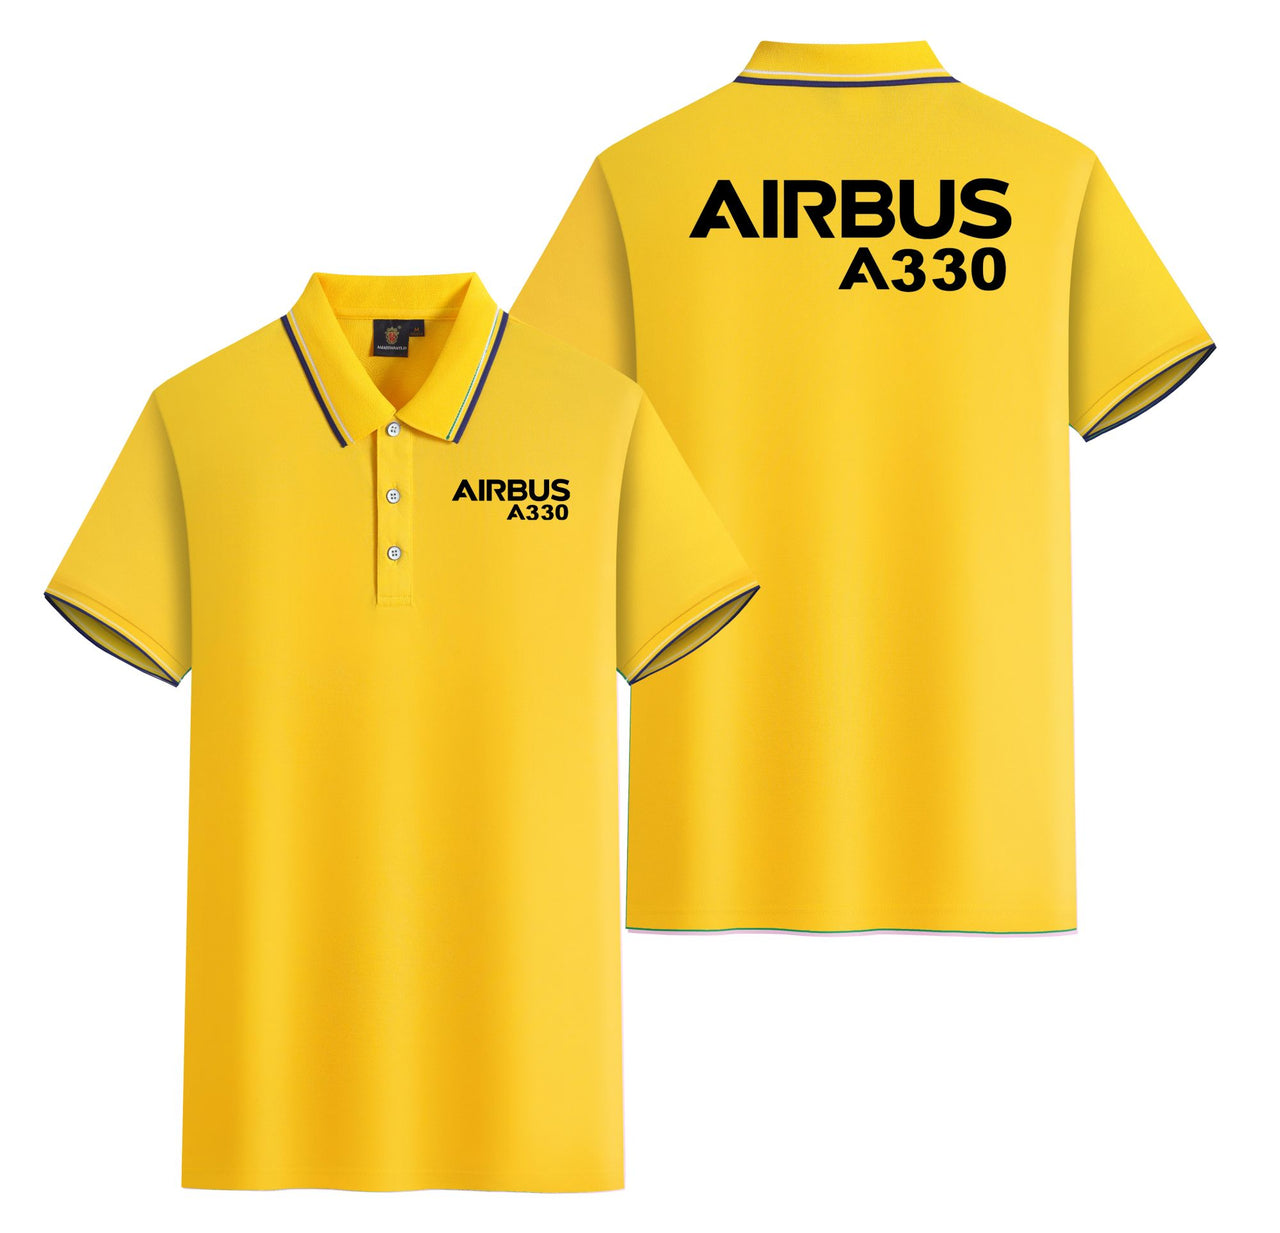 Airbus A330 & Text Designed Stylish Polo T-Shirts (Double-Side)